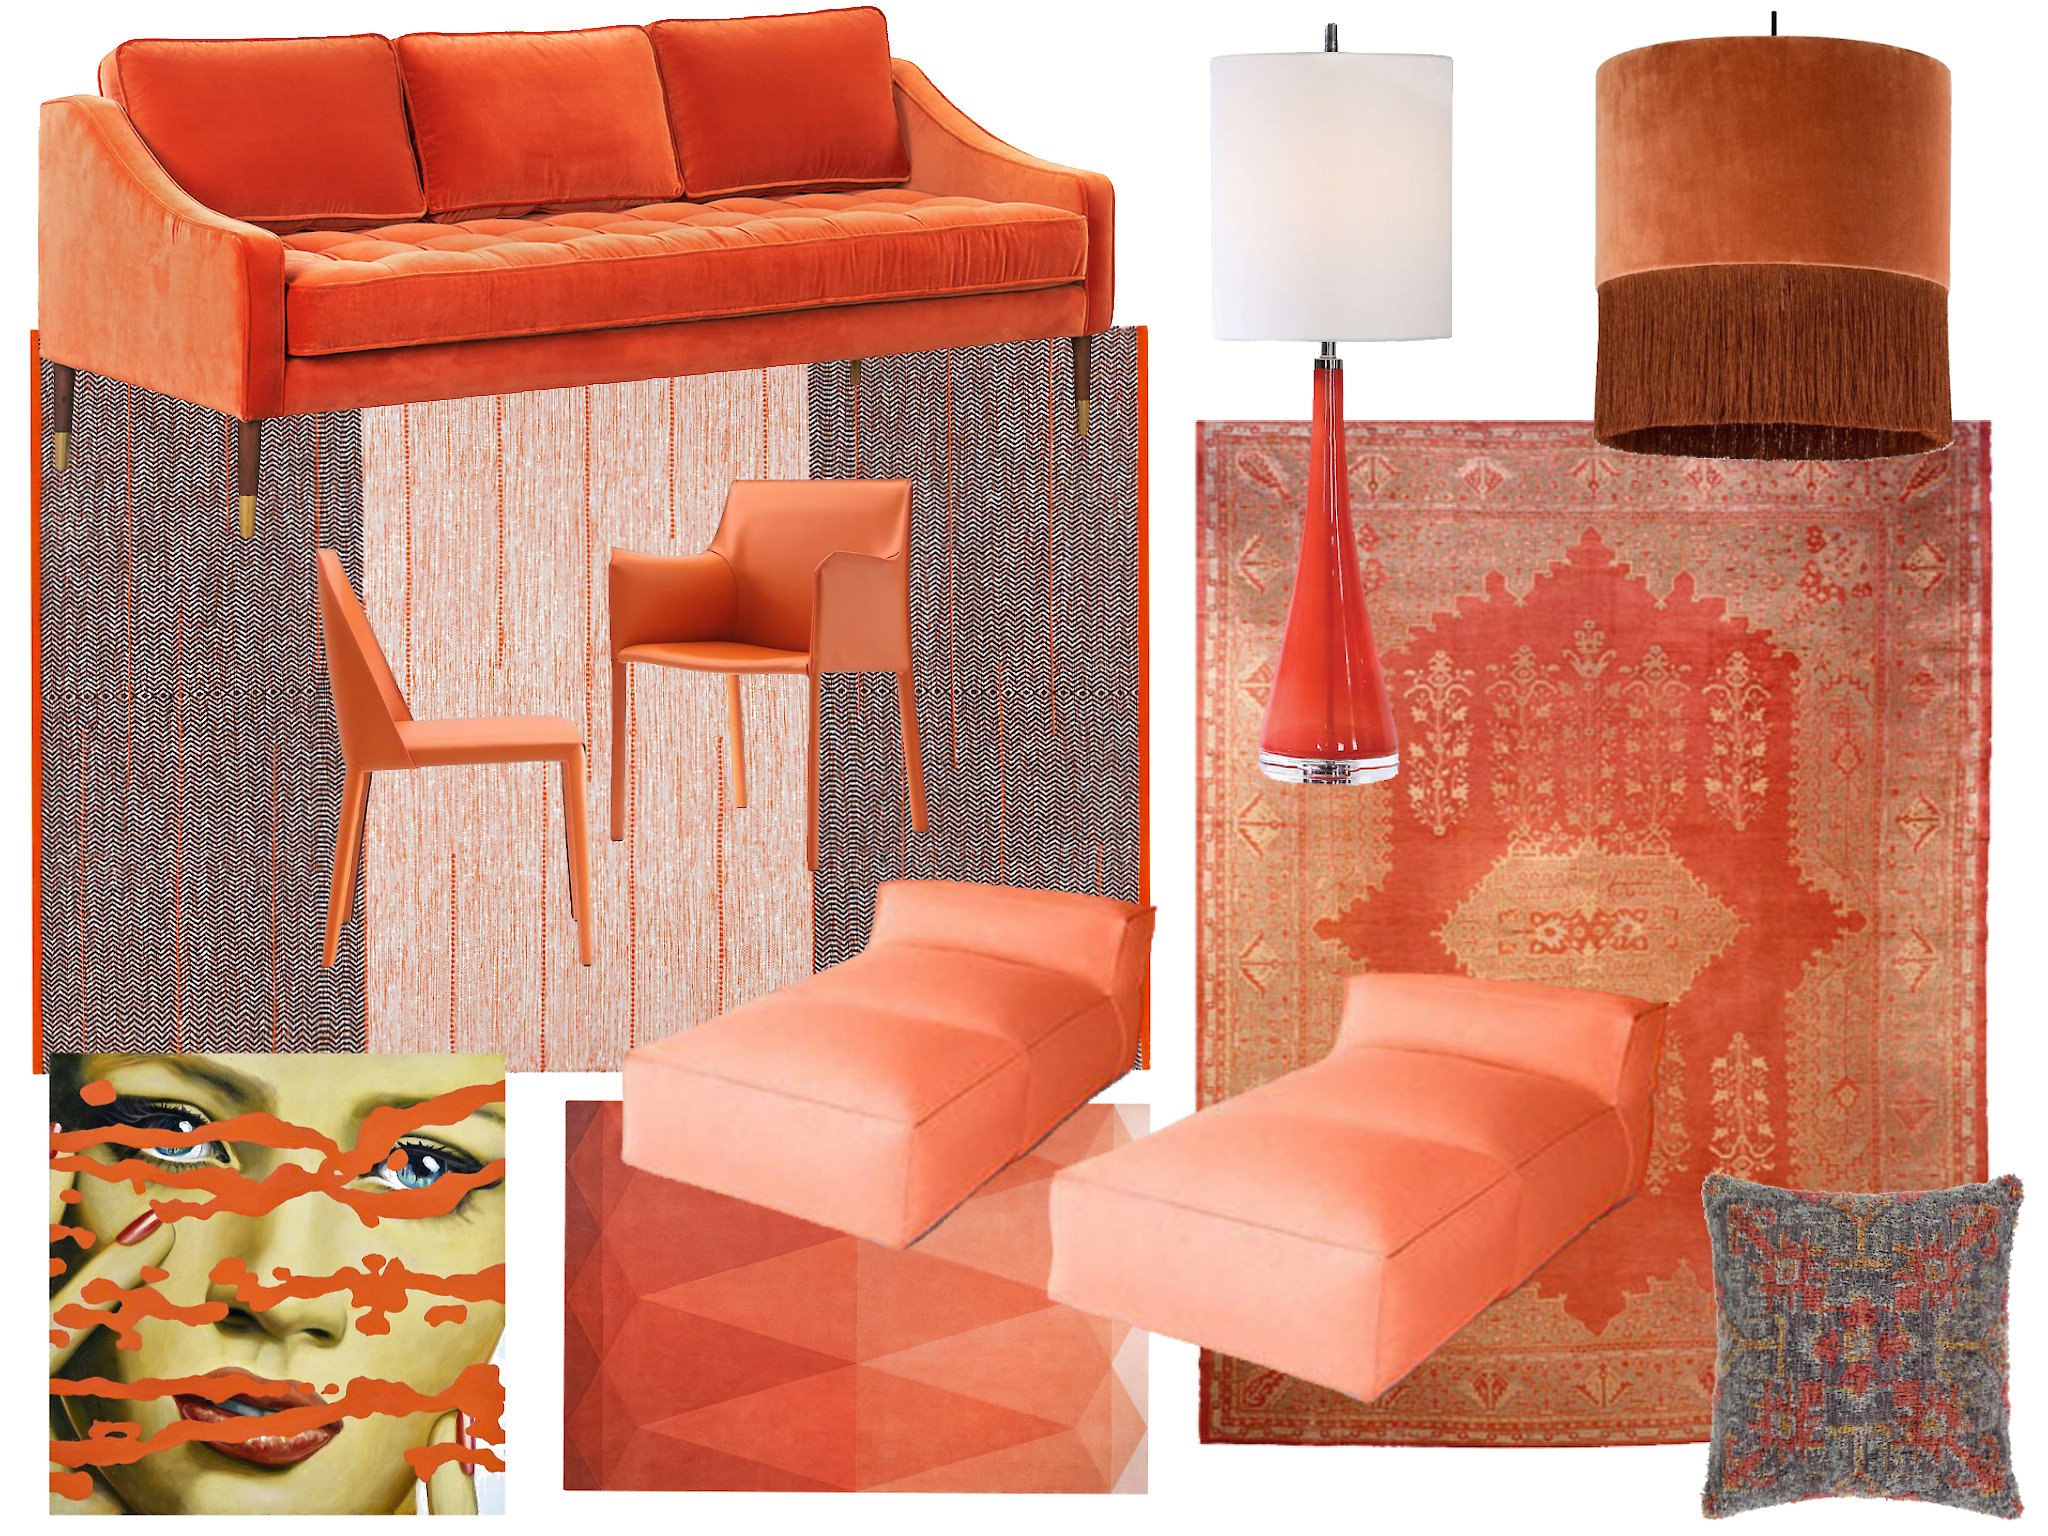 Courageous Coral Orange & Black by Inviting Interior Style.jpg